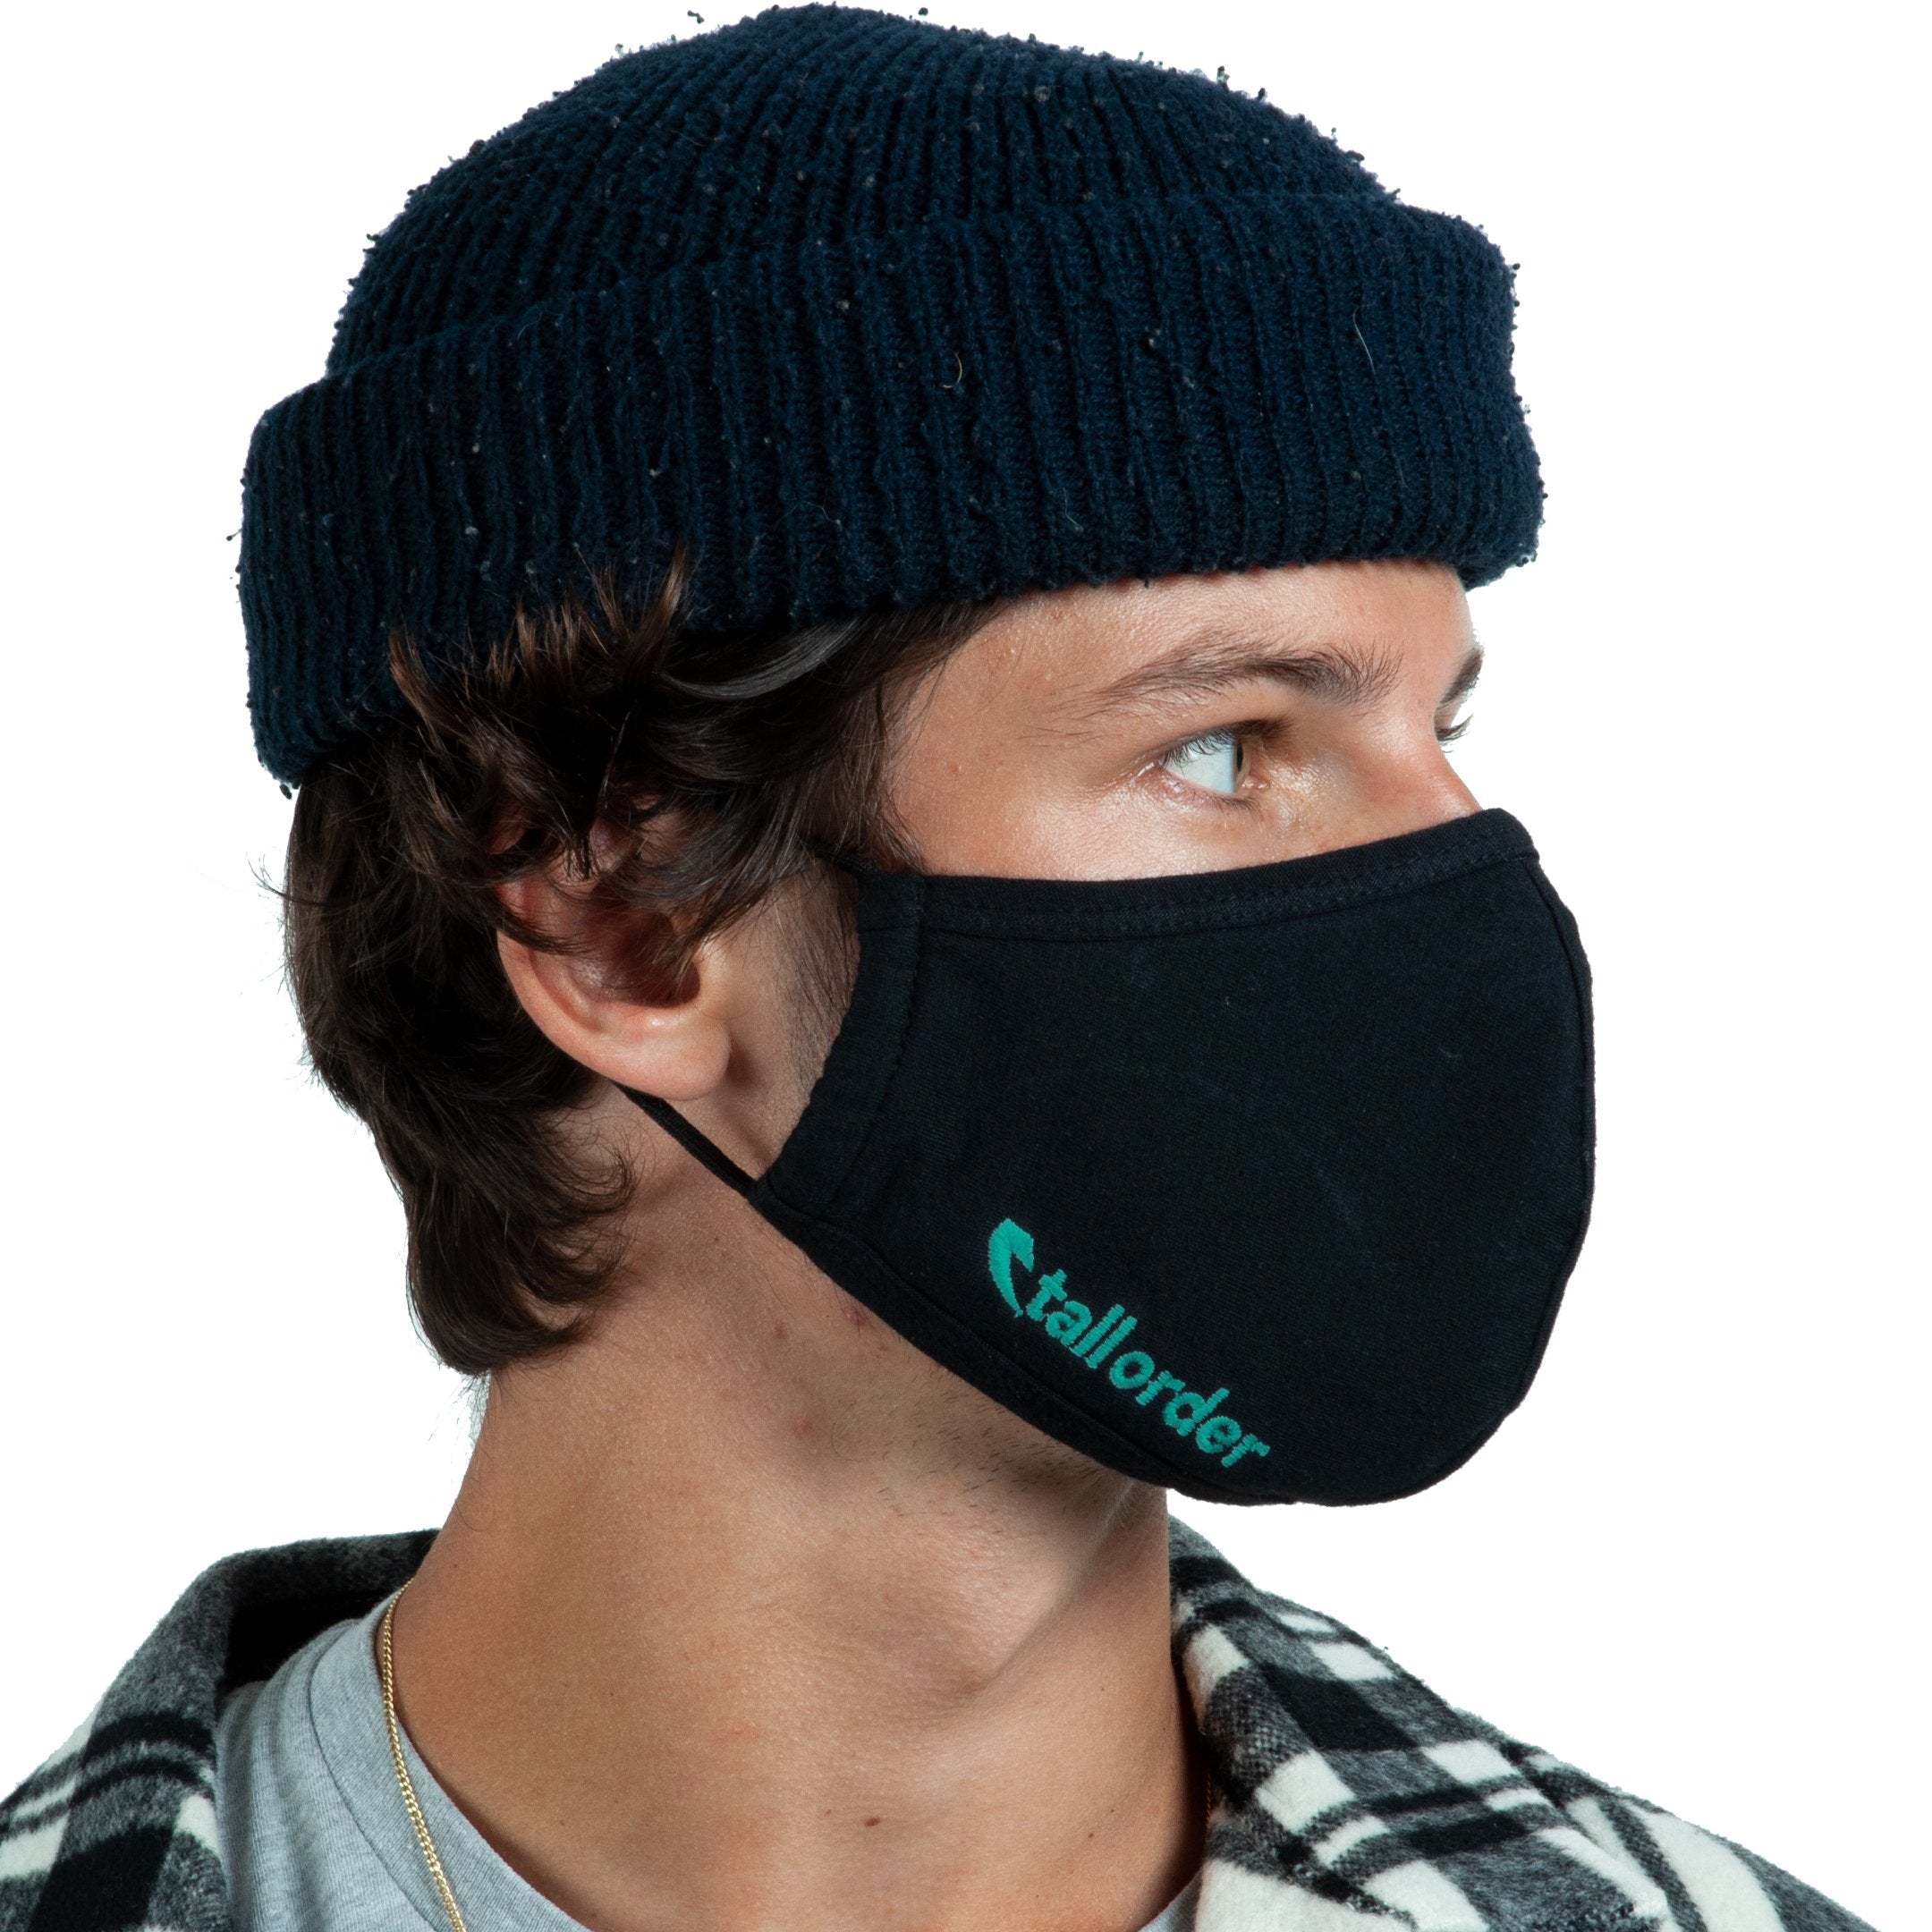 Tall Order Embroidered Mask - Black With Teal Embroidery | BMX